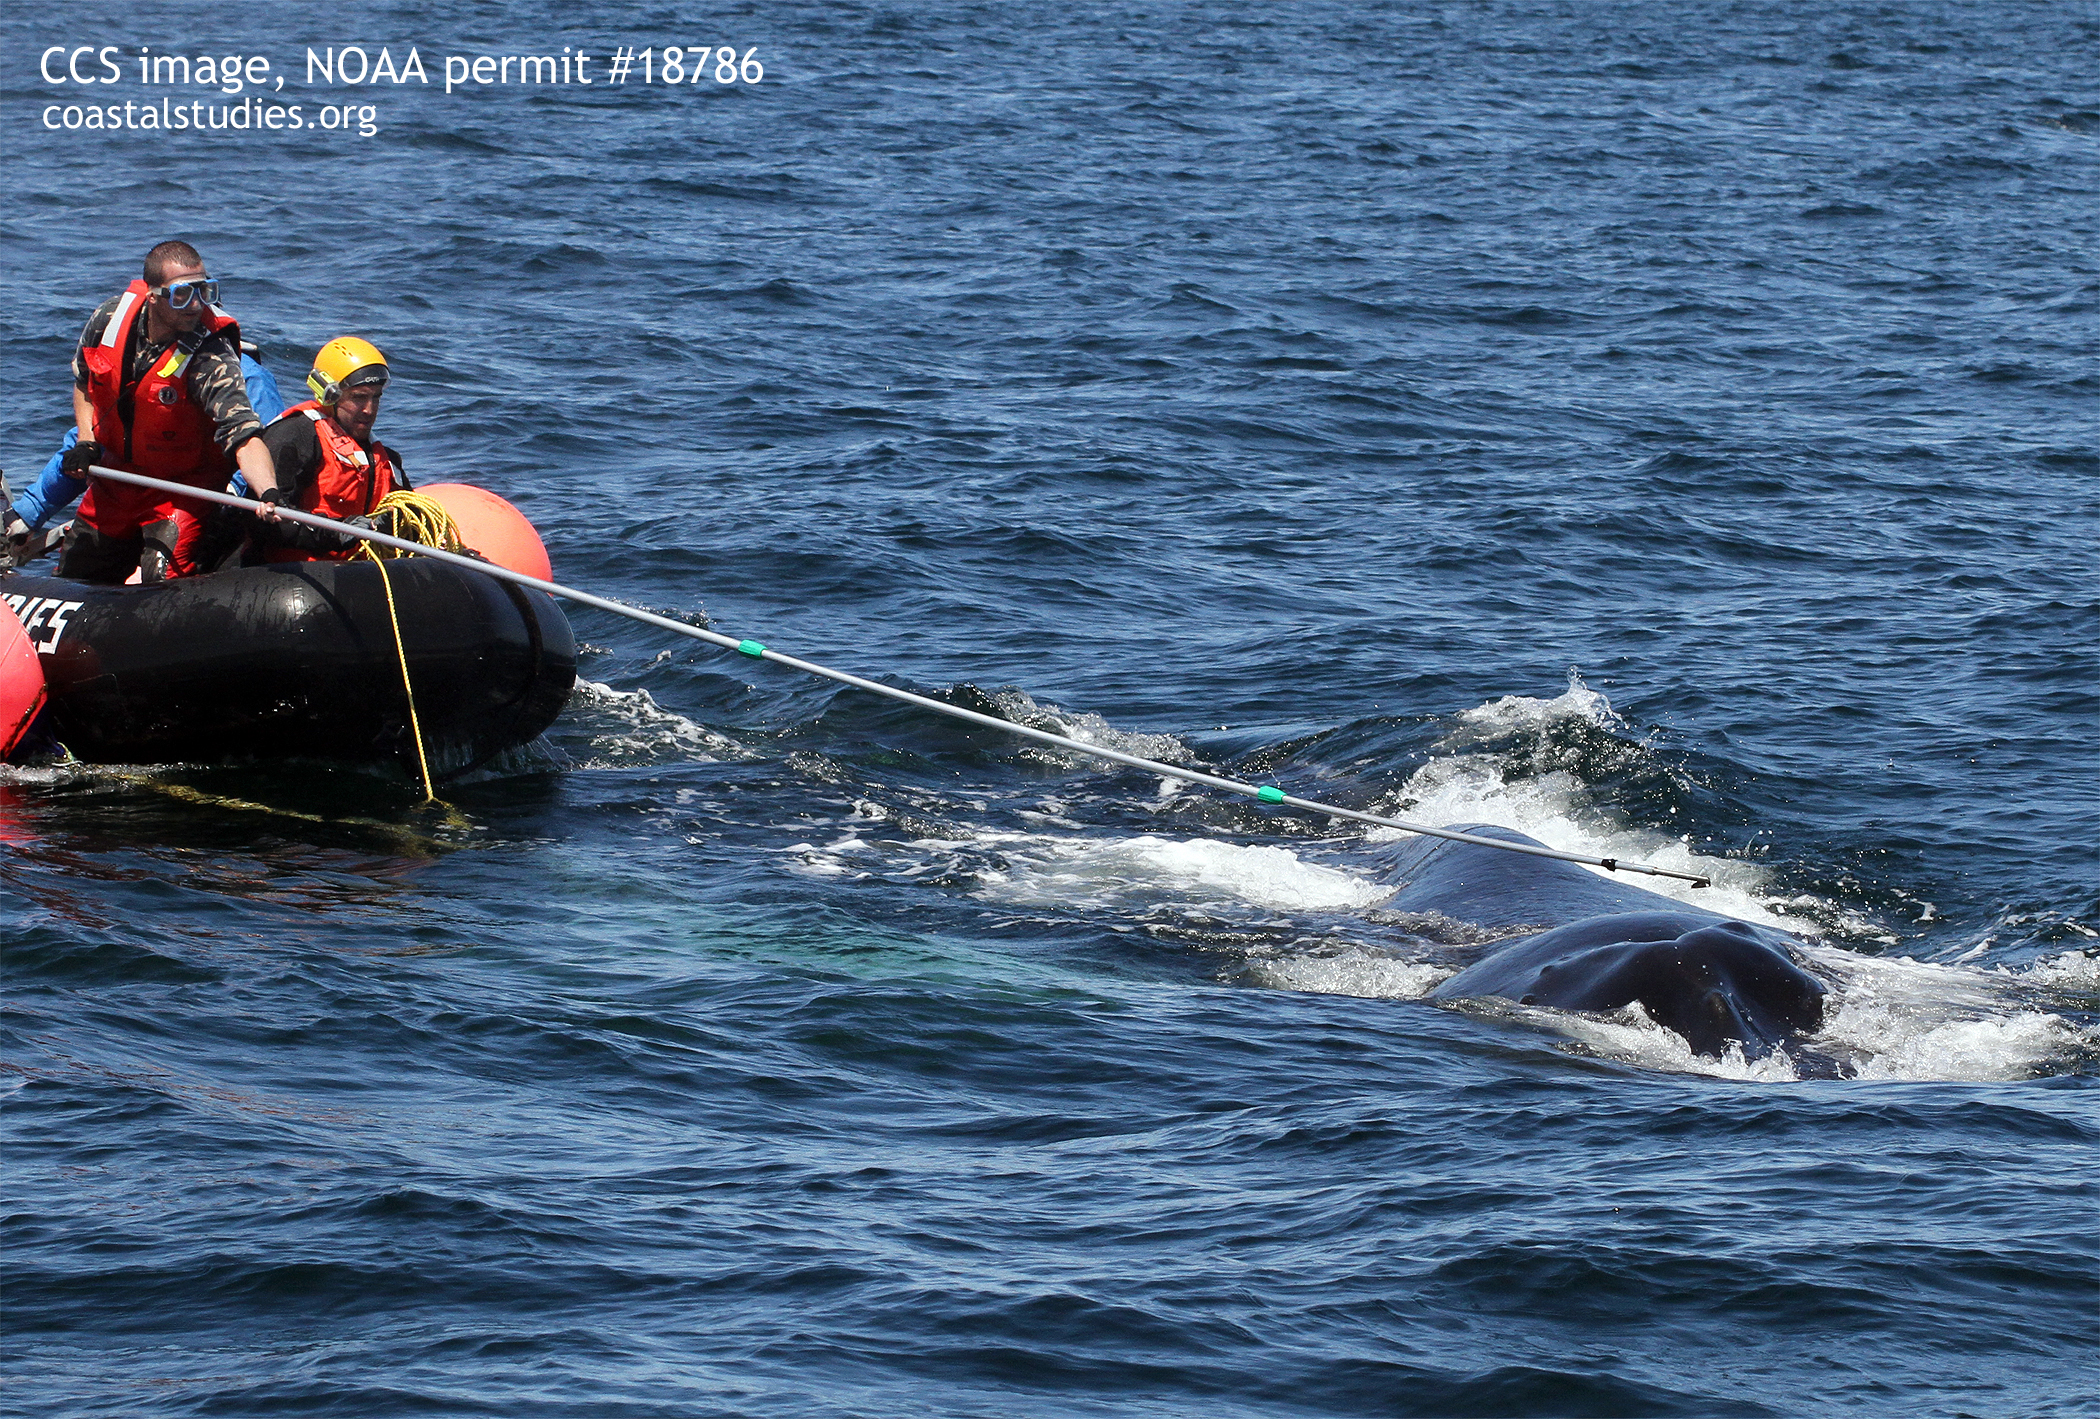 Marine Animal Entanglement Response crew used a hooked knife to cut entanglement from humpback whale Foggy. CCS image taken under NOAA permit #18786.